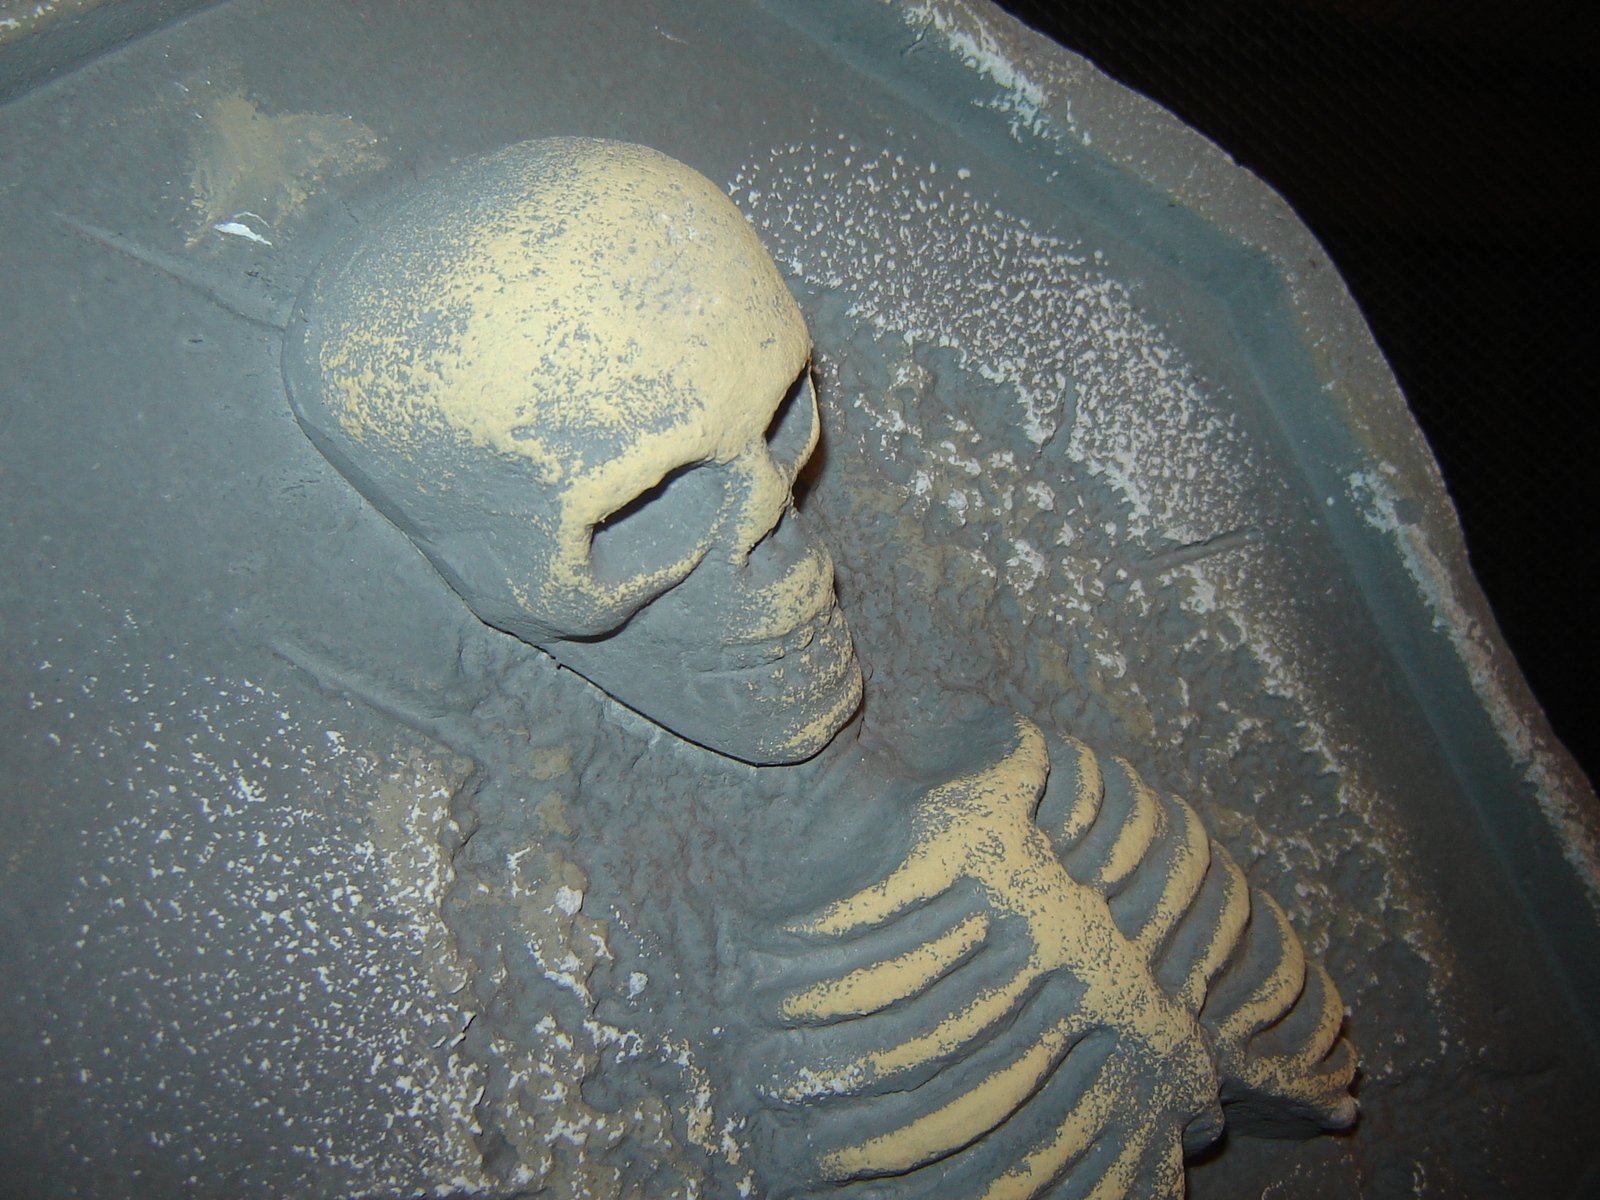 the small carved model of a skeleton sits in a bathtub